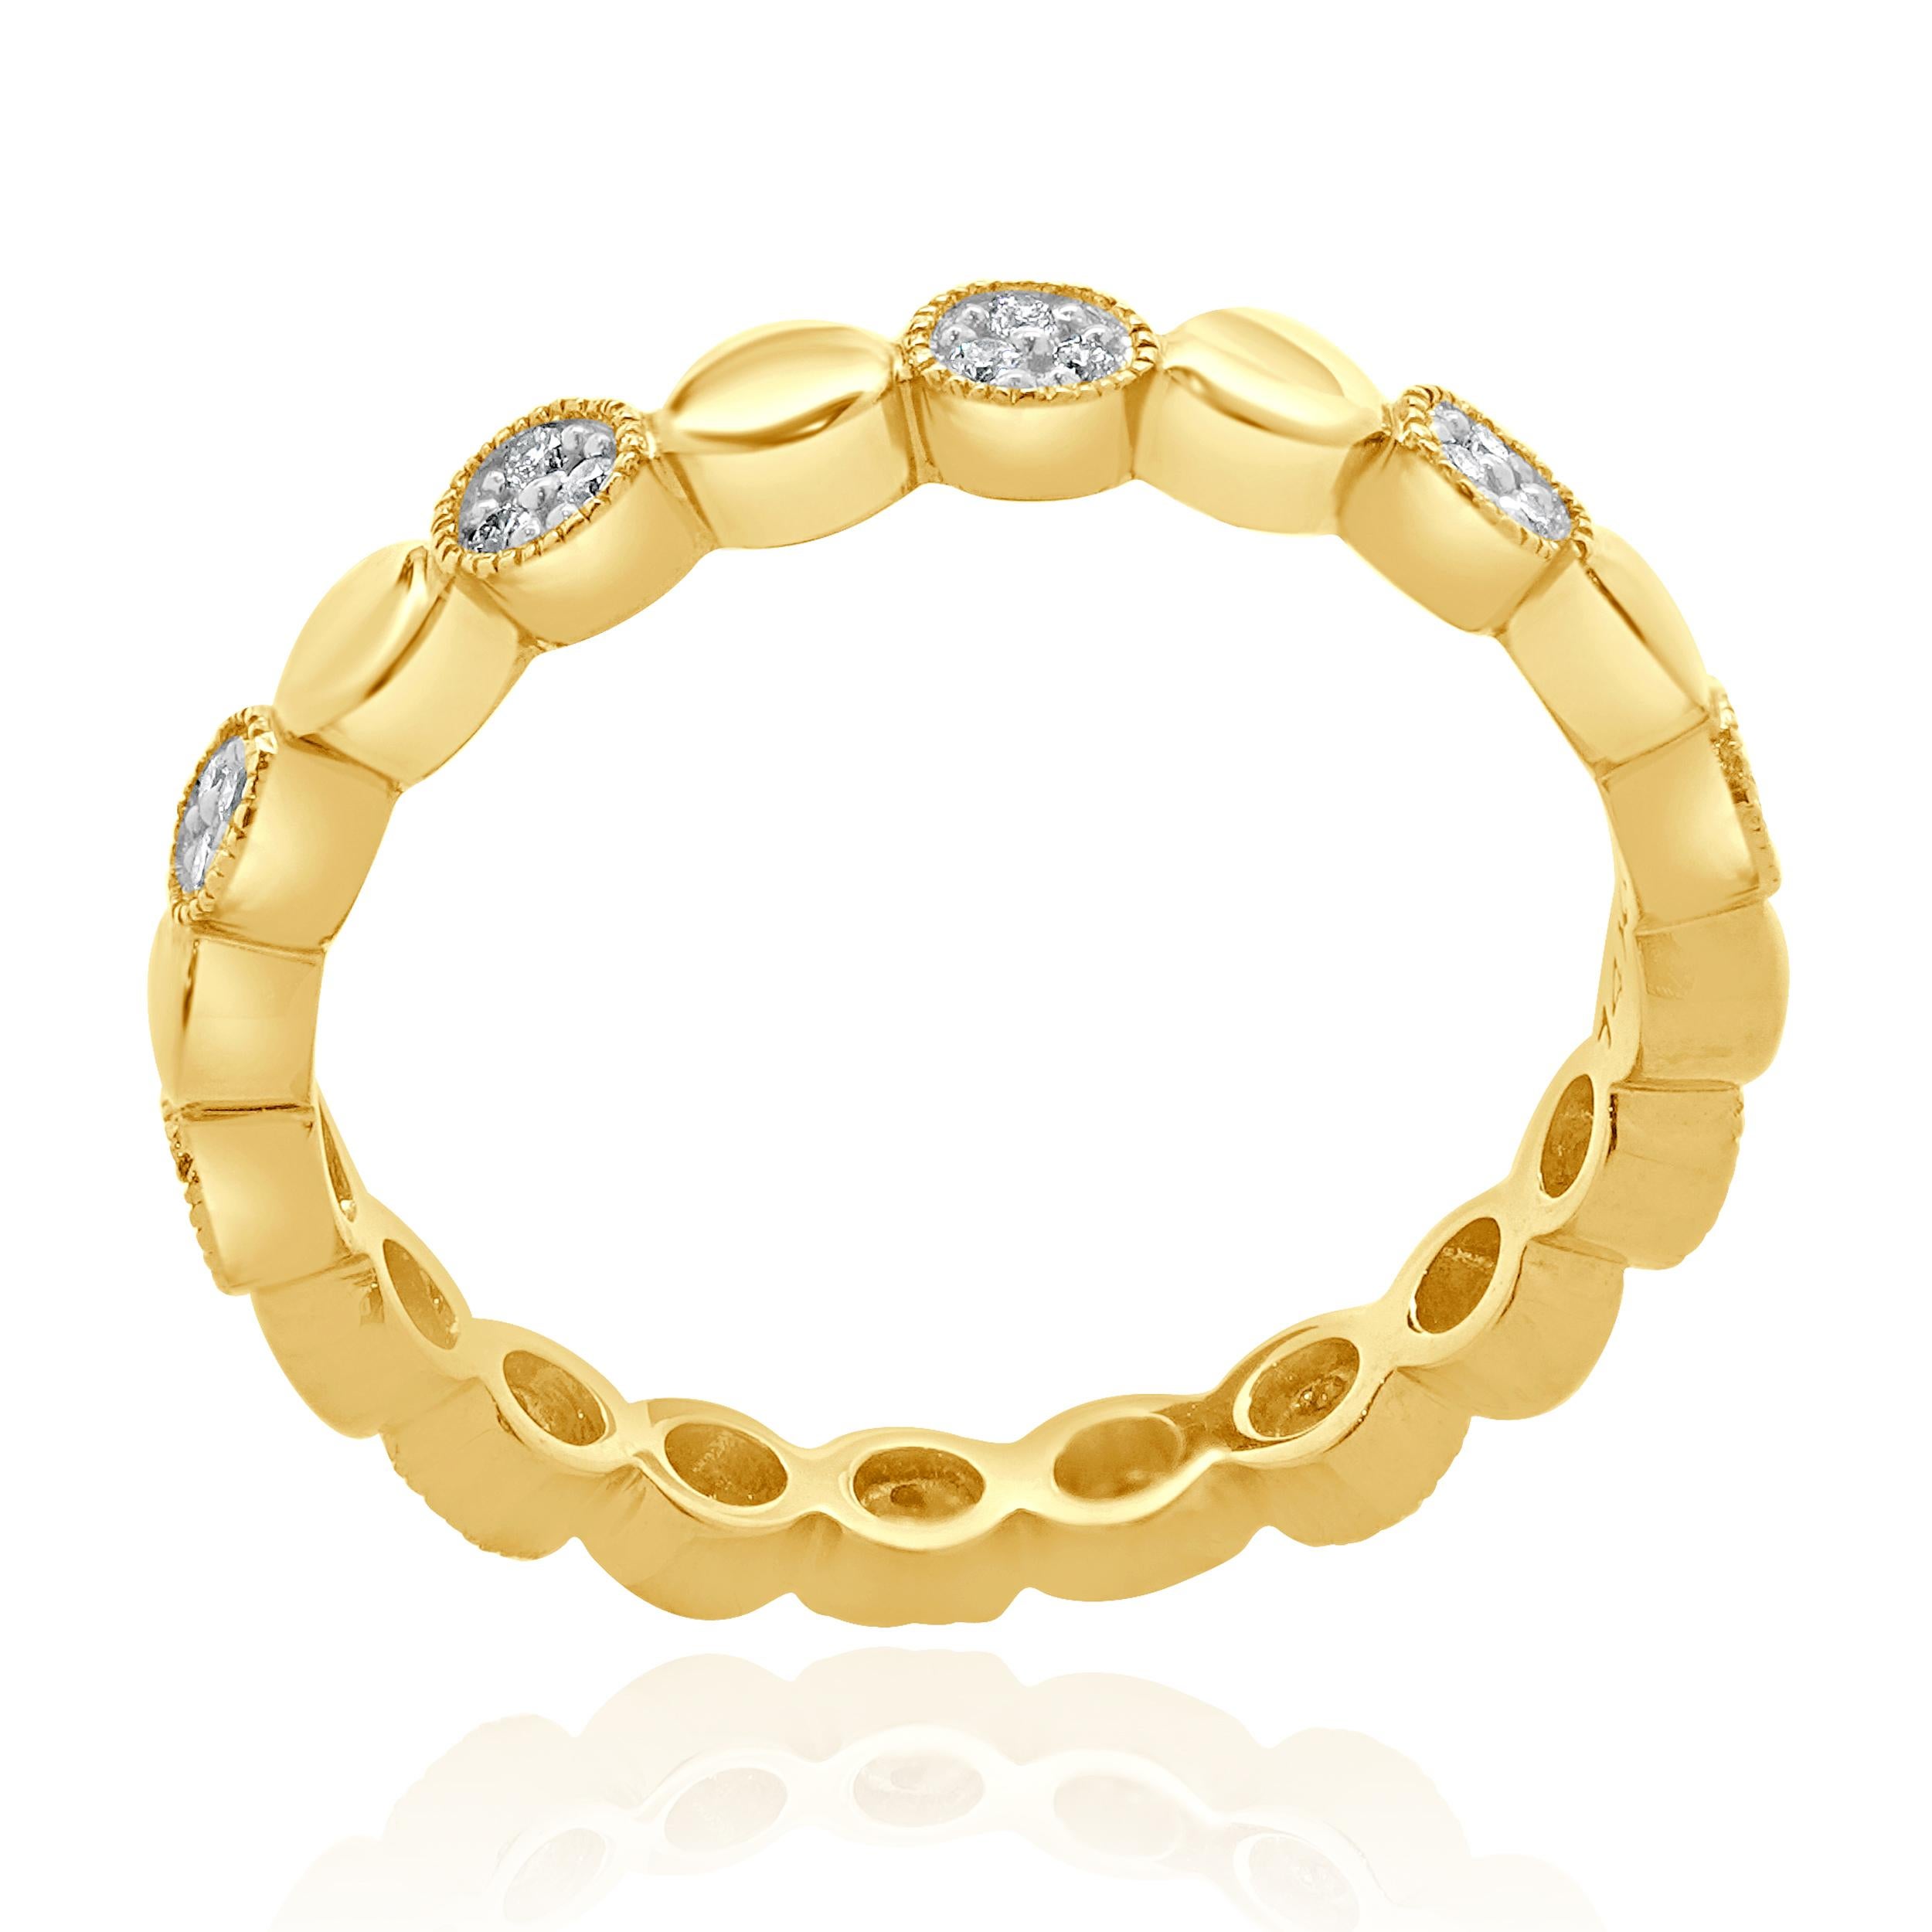 14 Karat Yellow Gold Pave Diamond Alternating Band In Excellent Condition For Sale In Scottsdale, AZ